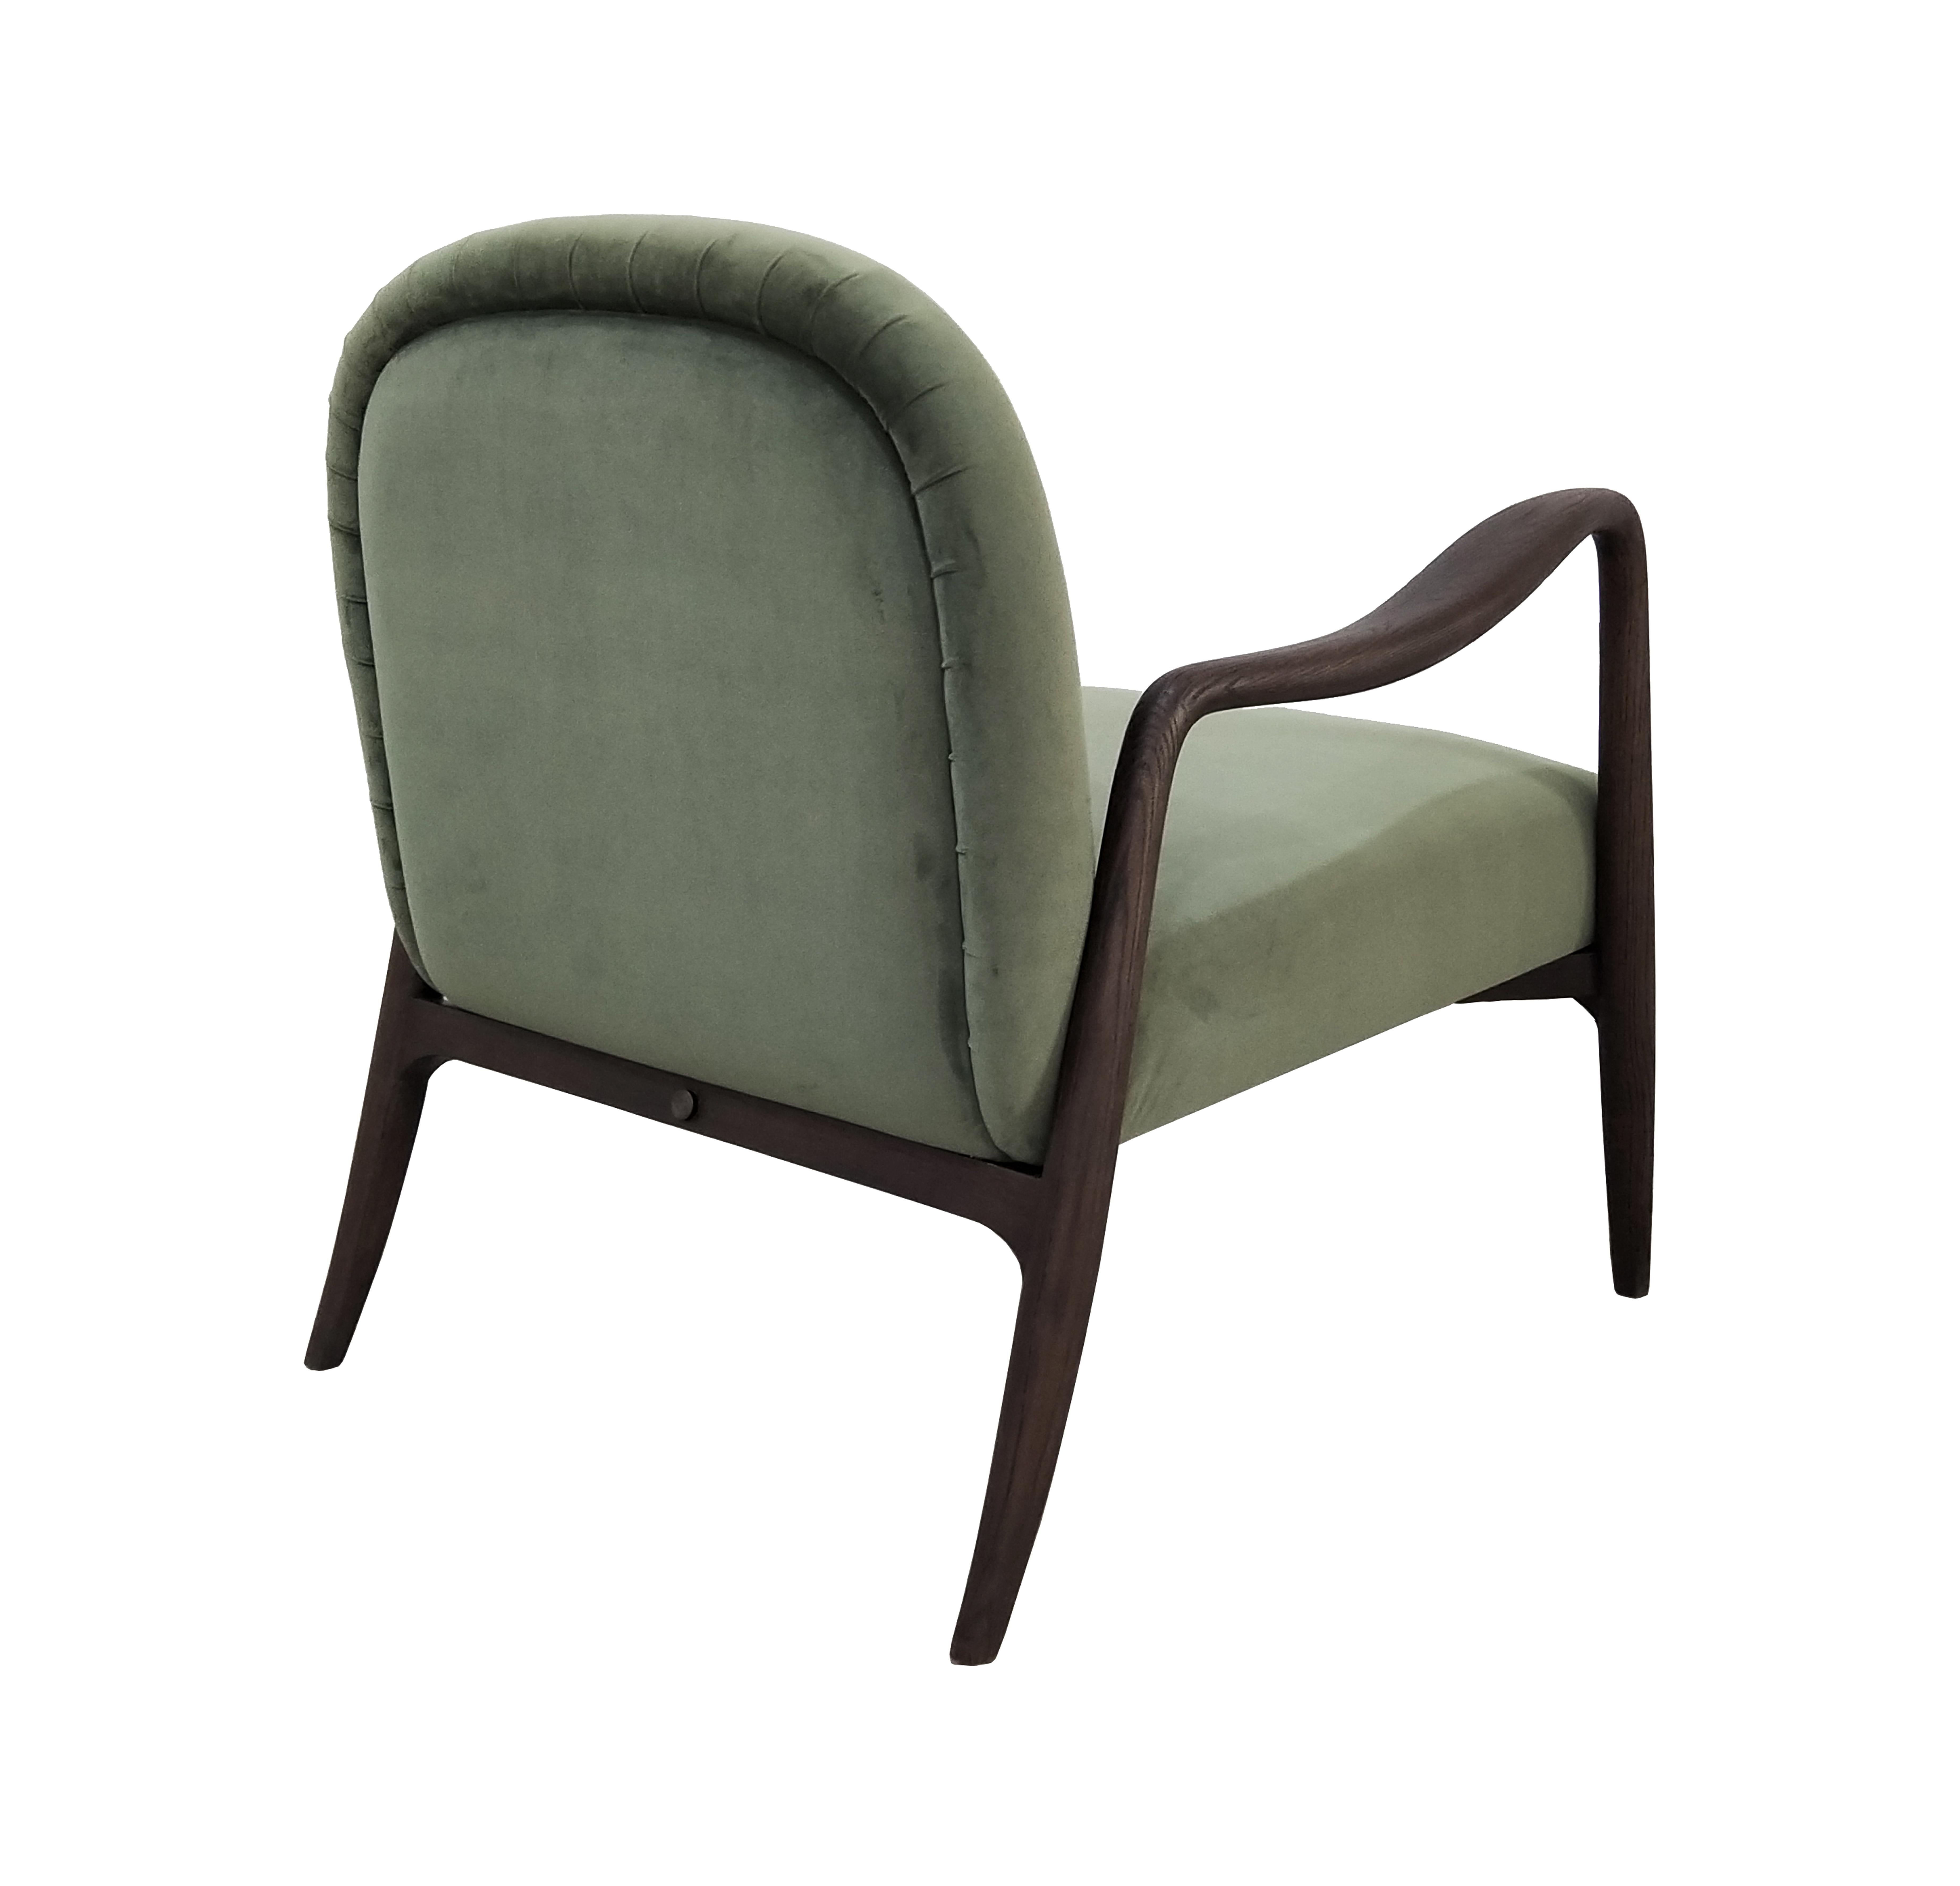 Modern Armchair Mid Century Rhythm André Fu Living Oak Olive Green Upholstered New For Sale